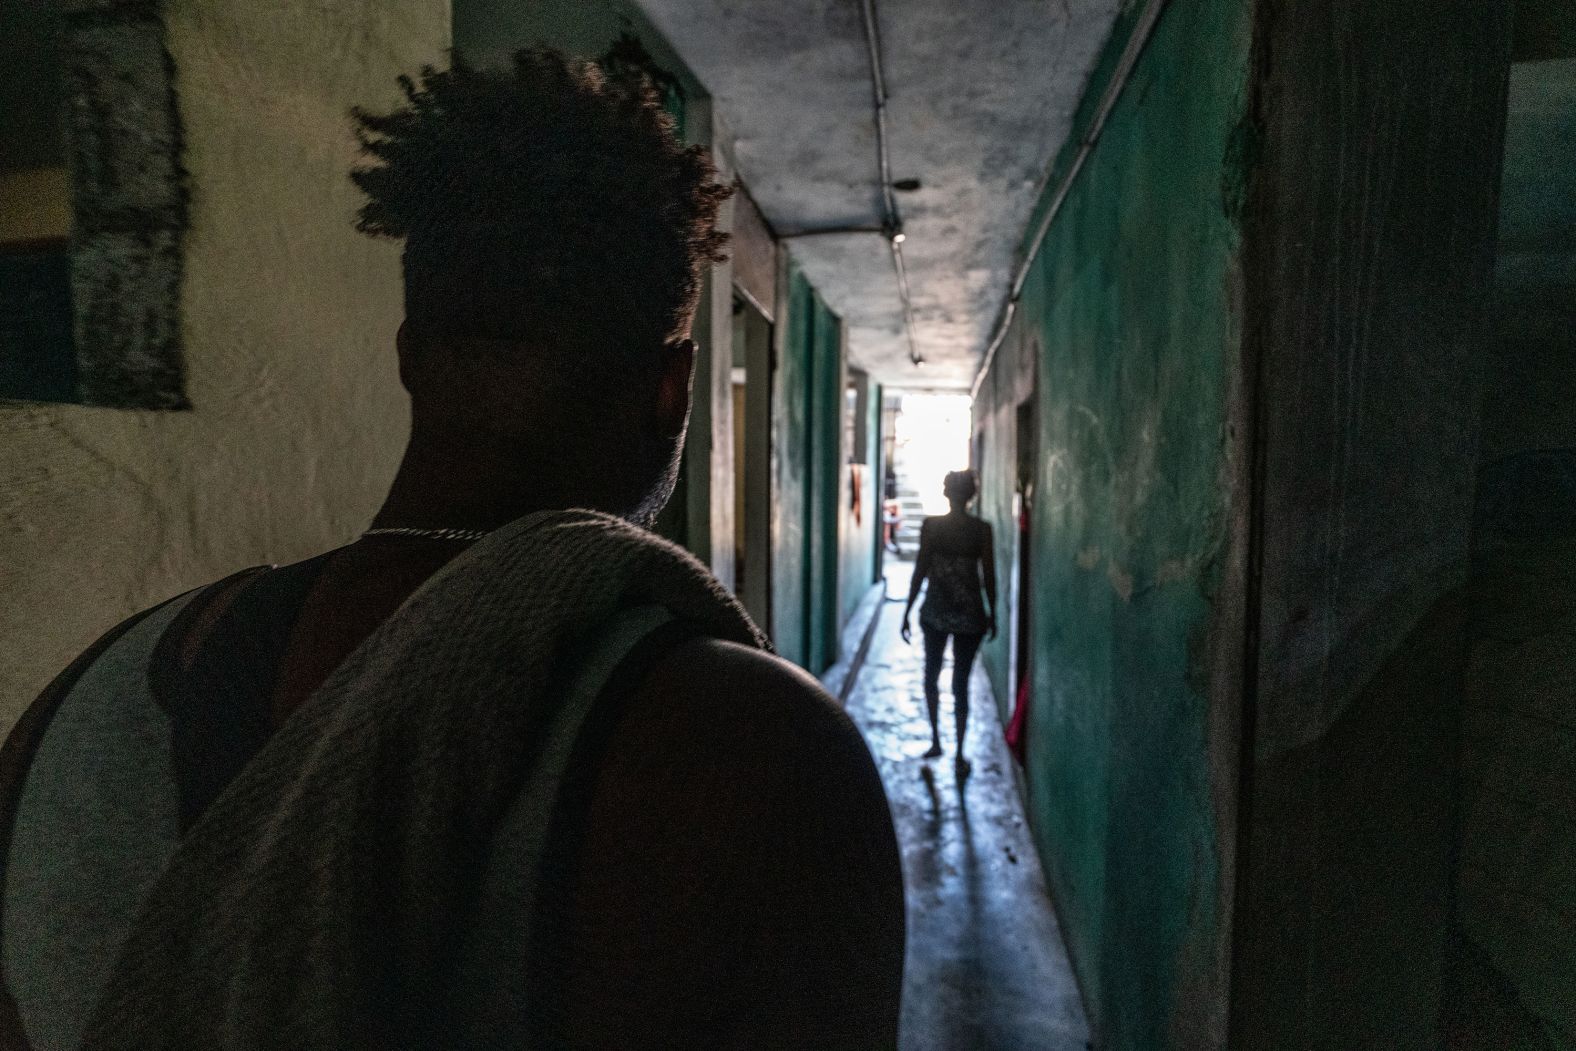 A man who recently fled from his home walks down the corridor of a former school that has been turned into a shelter.